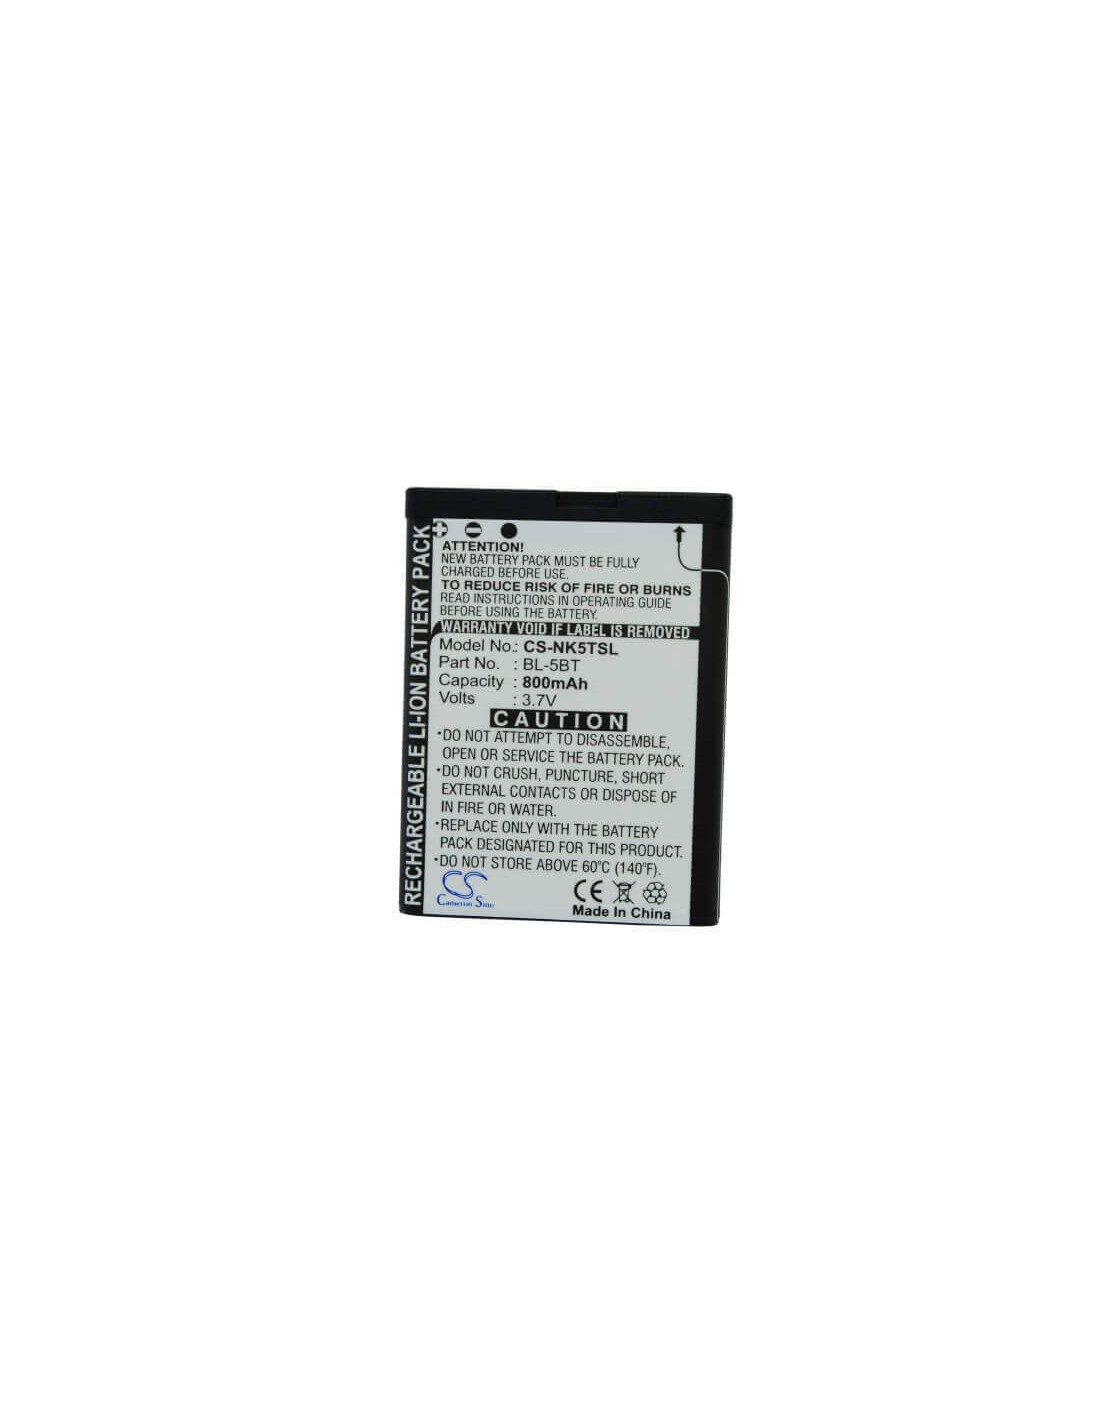 Battery for Nokia N75, 7510, 2600 classic 3.7V, 800mAh - 2.96Wh